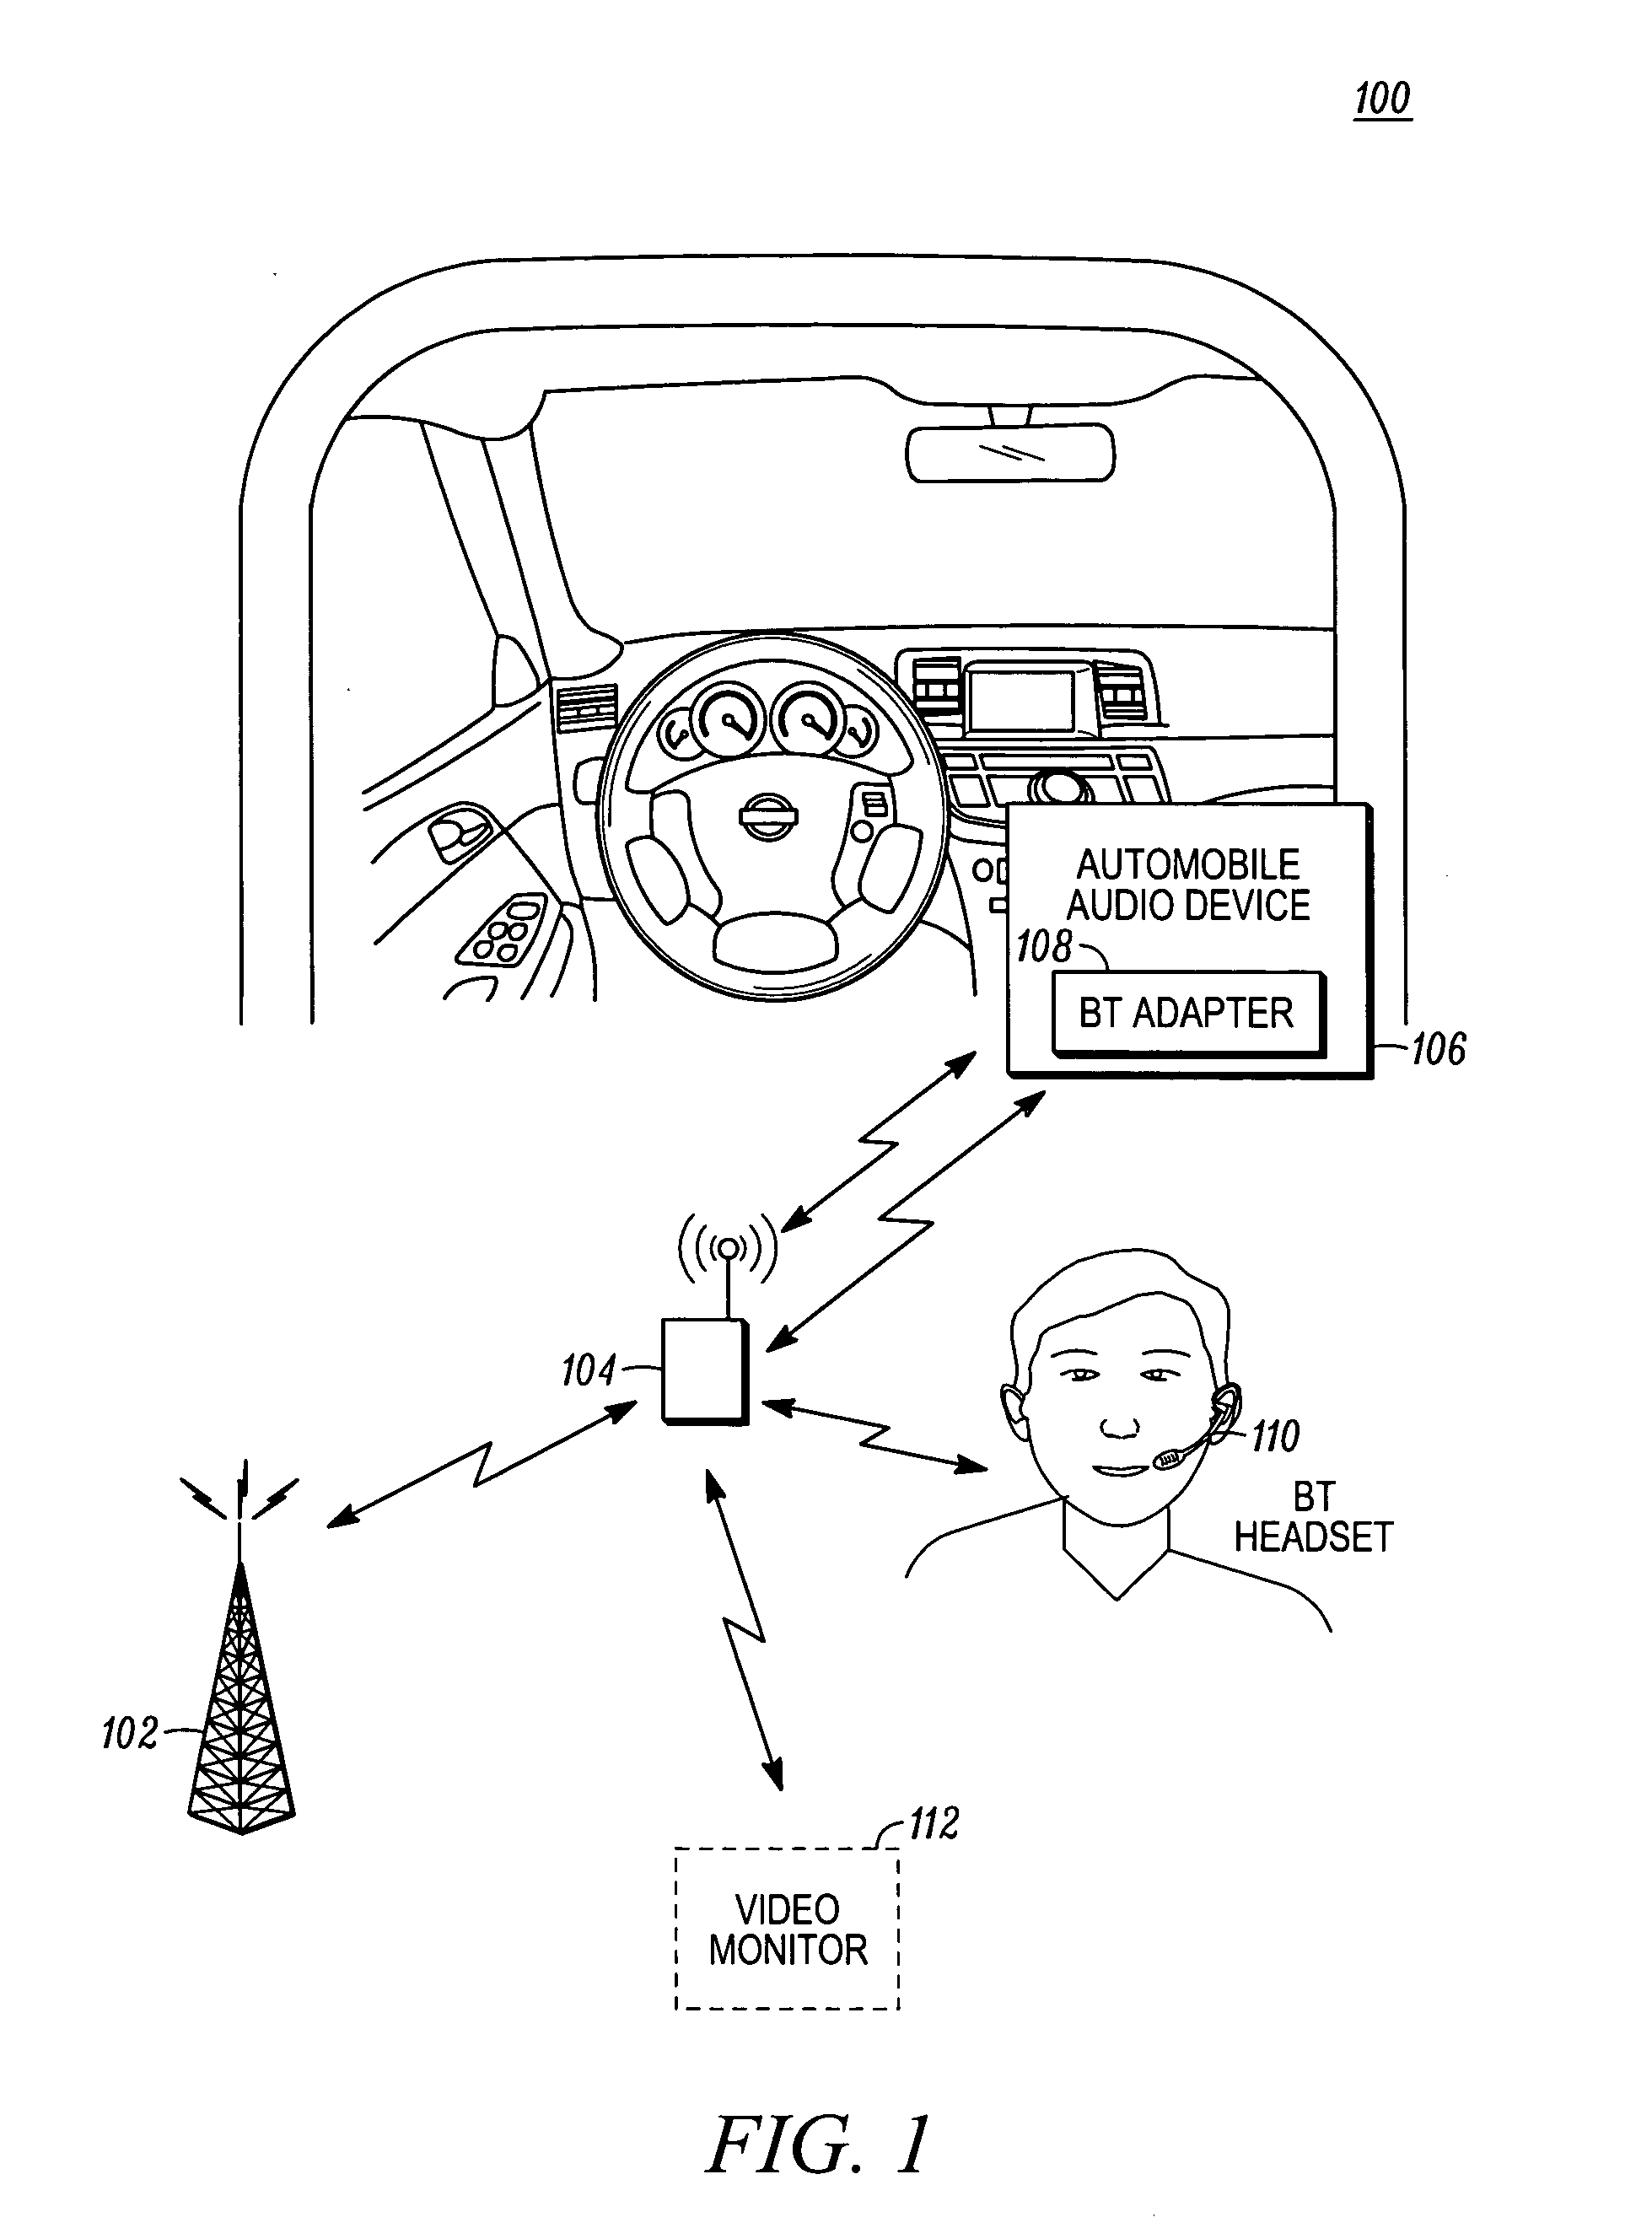 Method for information signal distribution between communication devices based on operating characteristics of a depletable power supply used by one of the devices